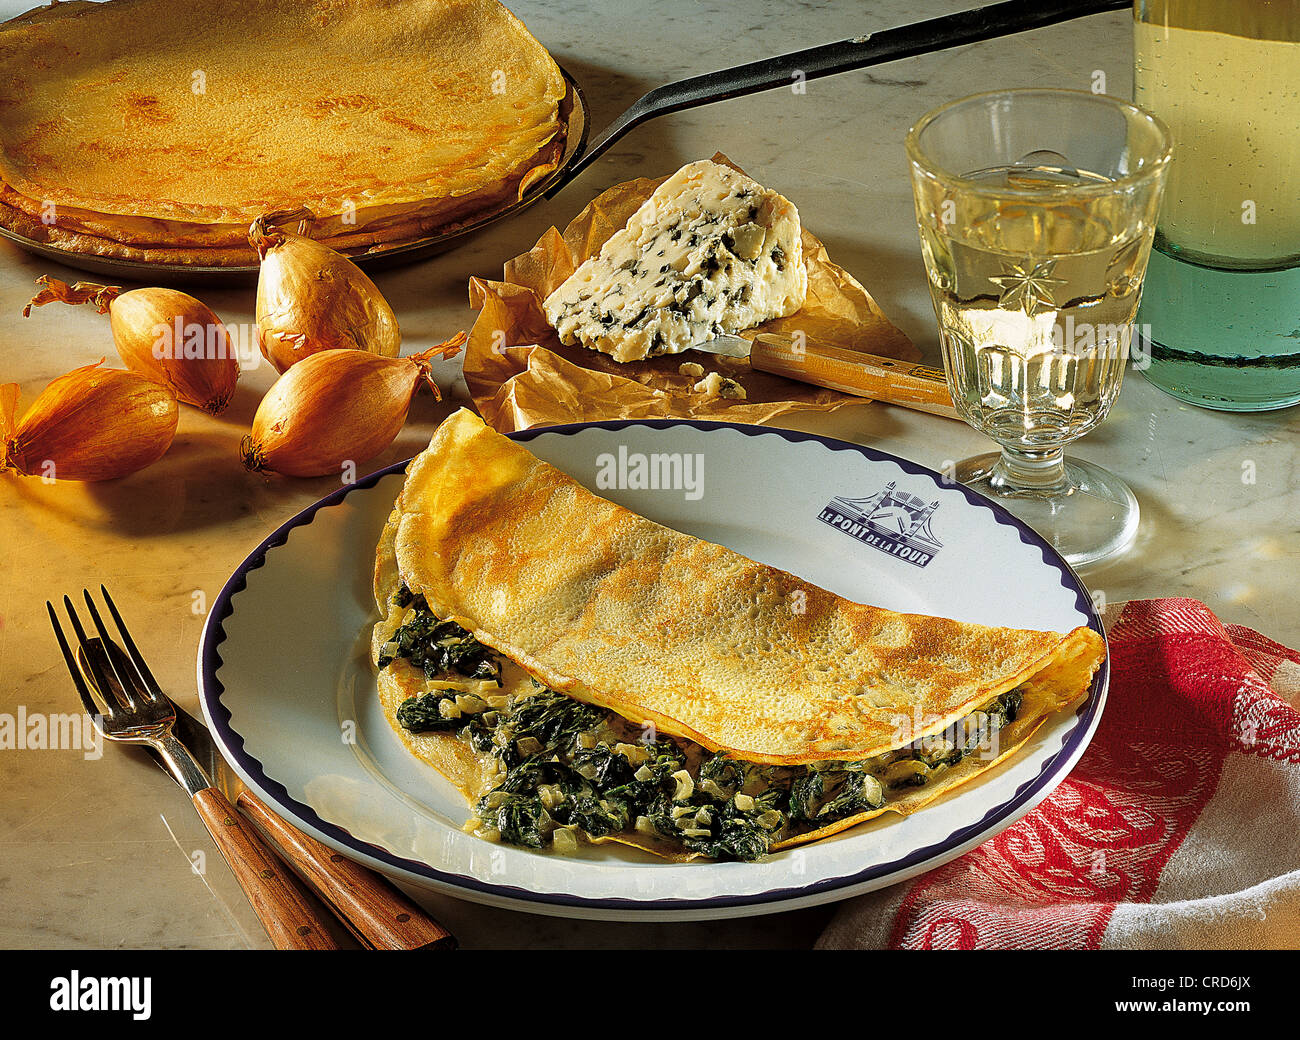 Crepes with a creamy stuffing made of Roquefort and silverbeet, France. Stock Photo